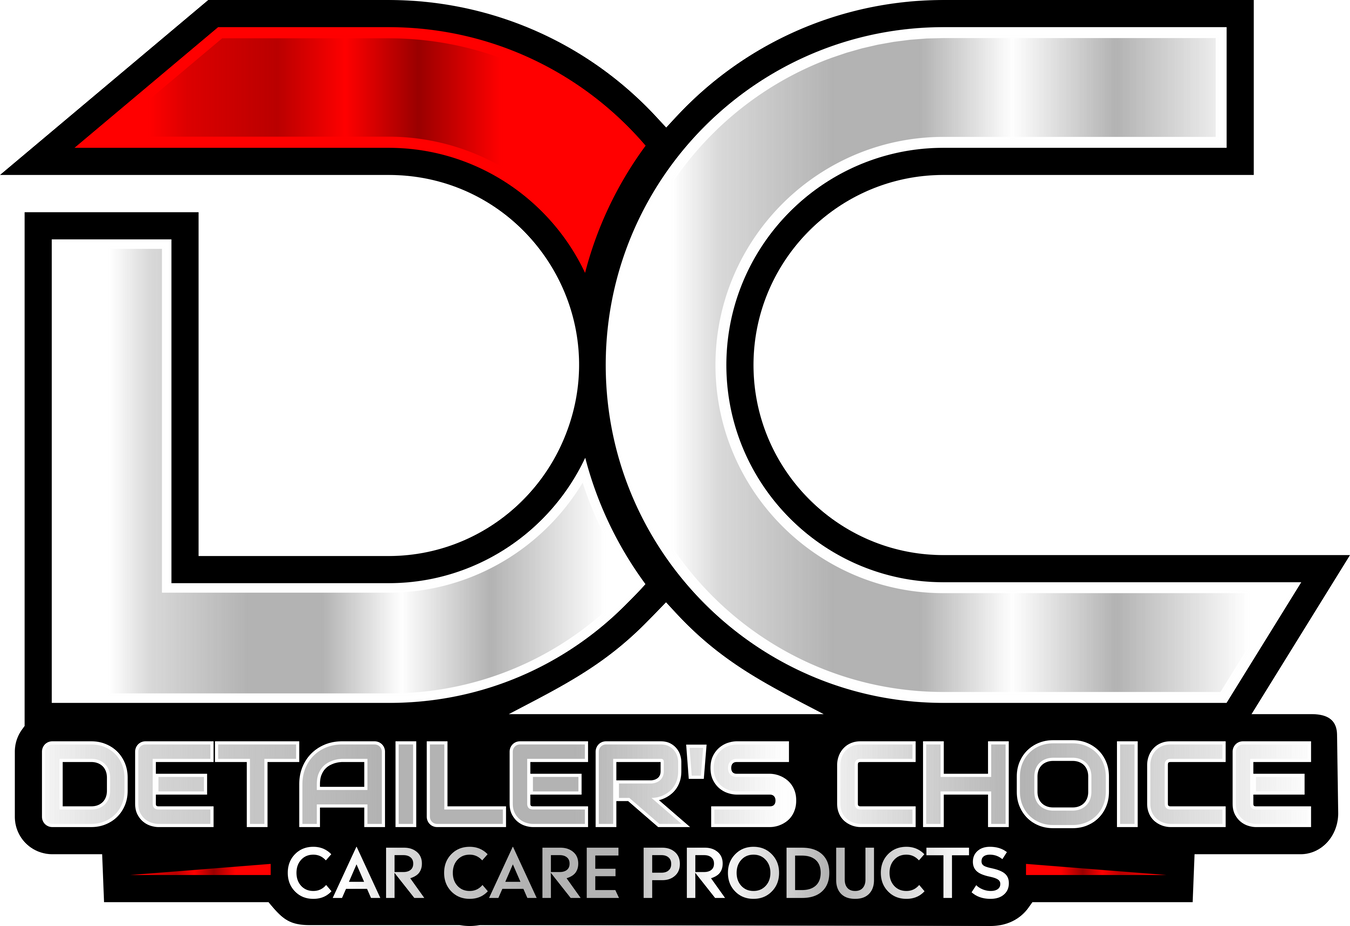 Detailer's Choice Auto Detailing Products